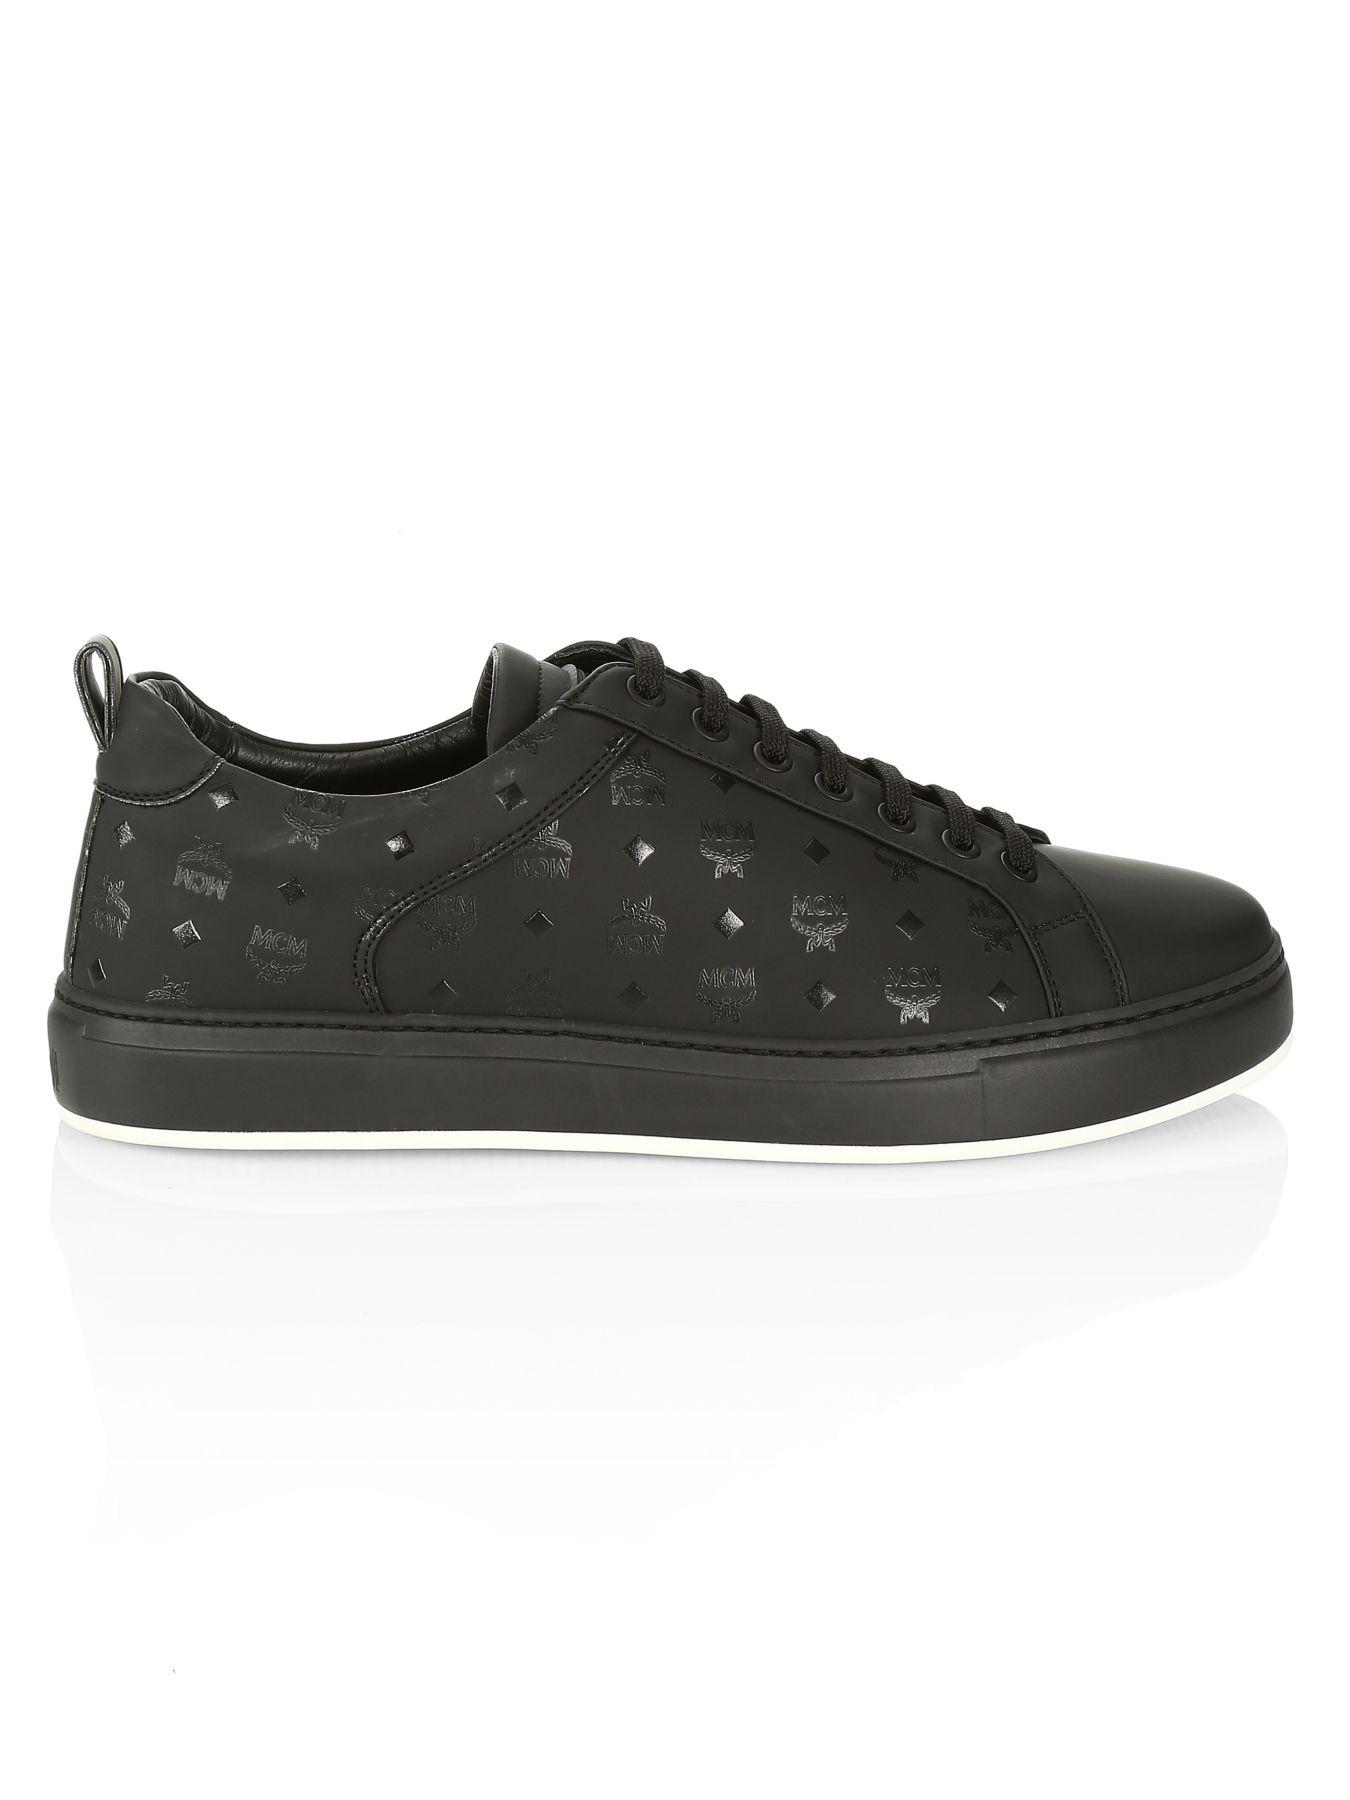 MCM Logo Group M Leather Sneakers in Black for Men - Lyst